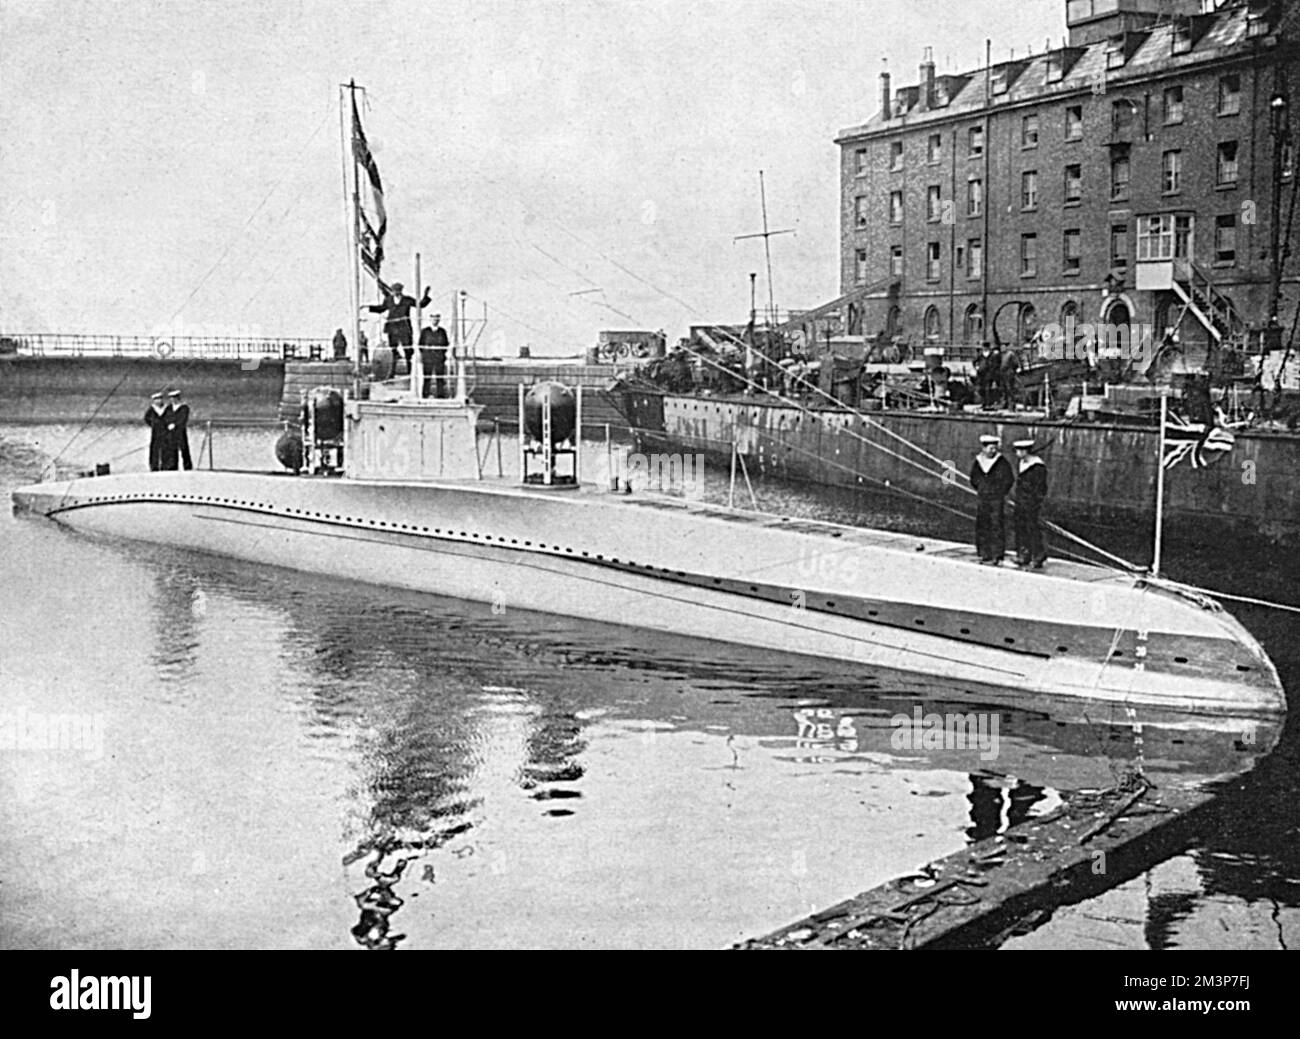 U C 5, a captured German submarine, exhibited at Temple Pier in London with the British ensign flying over the German flag.       Date: 1916 Stock Photo